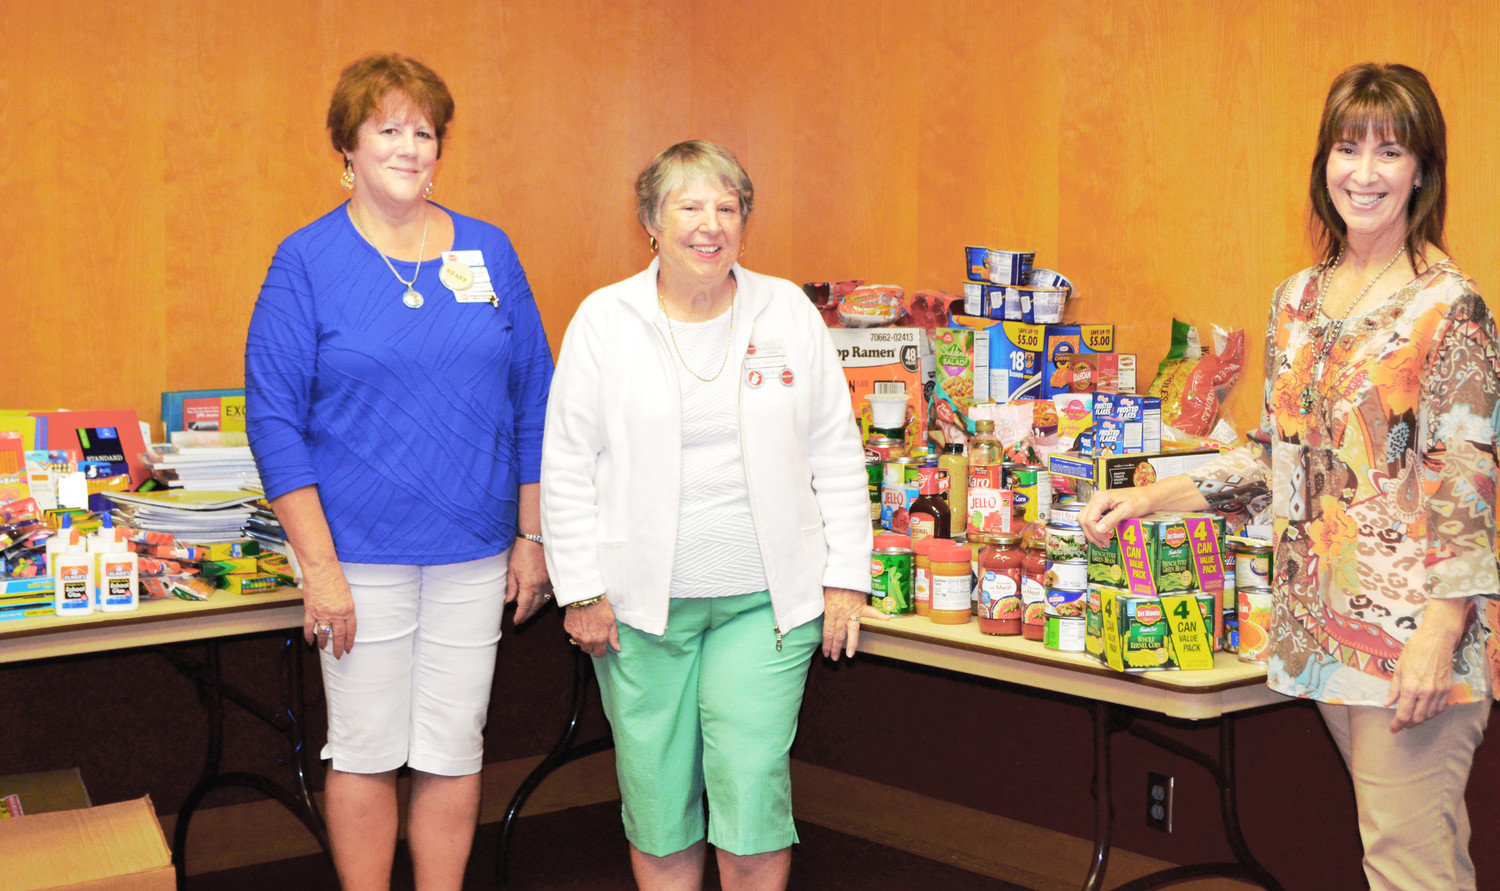 A total of 346 pounds of food were donated last week to the Kindness Cottage Food Bank by RV enthusiasts who attended the SMART National Muster last week at the Mineola Civic Center. The table to the left is heaped with school supplies also donated by SMART. They will benefit schools in Mineola. From left are SMART members Gwen Hopper of Nevada and Sally Kavanaugh of Arizona and BJ Gold, director of the Kindness Cottage.